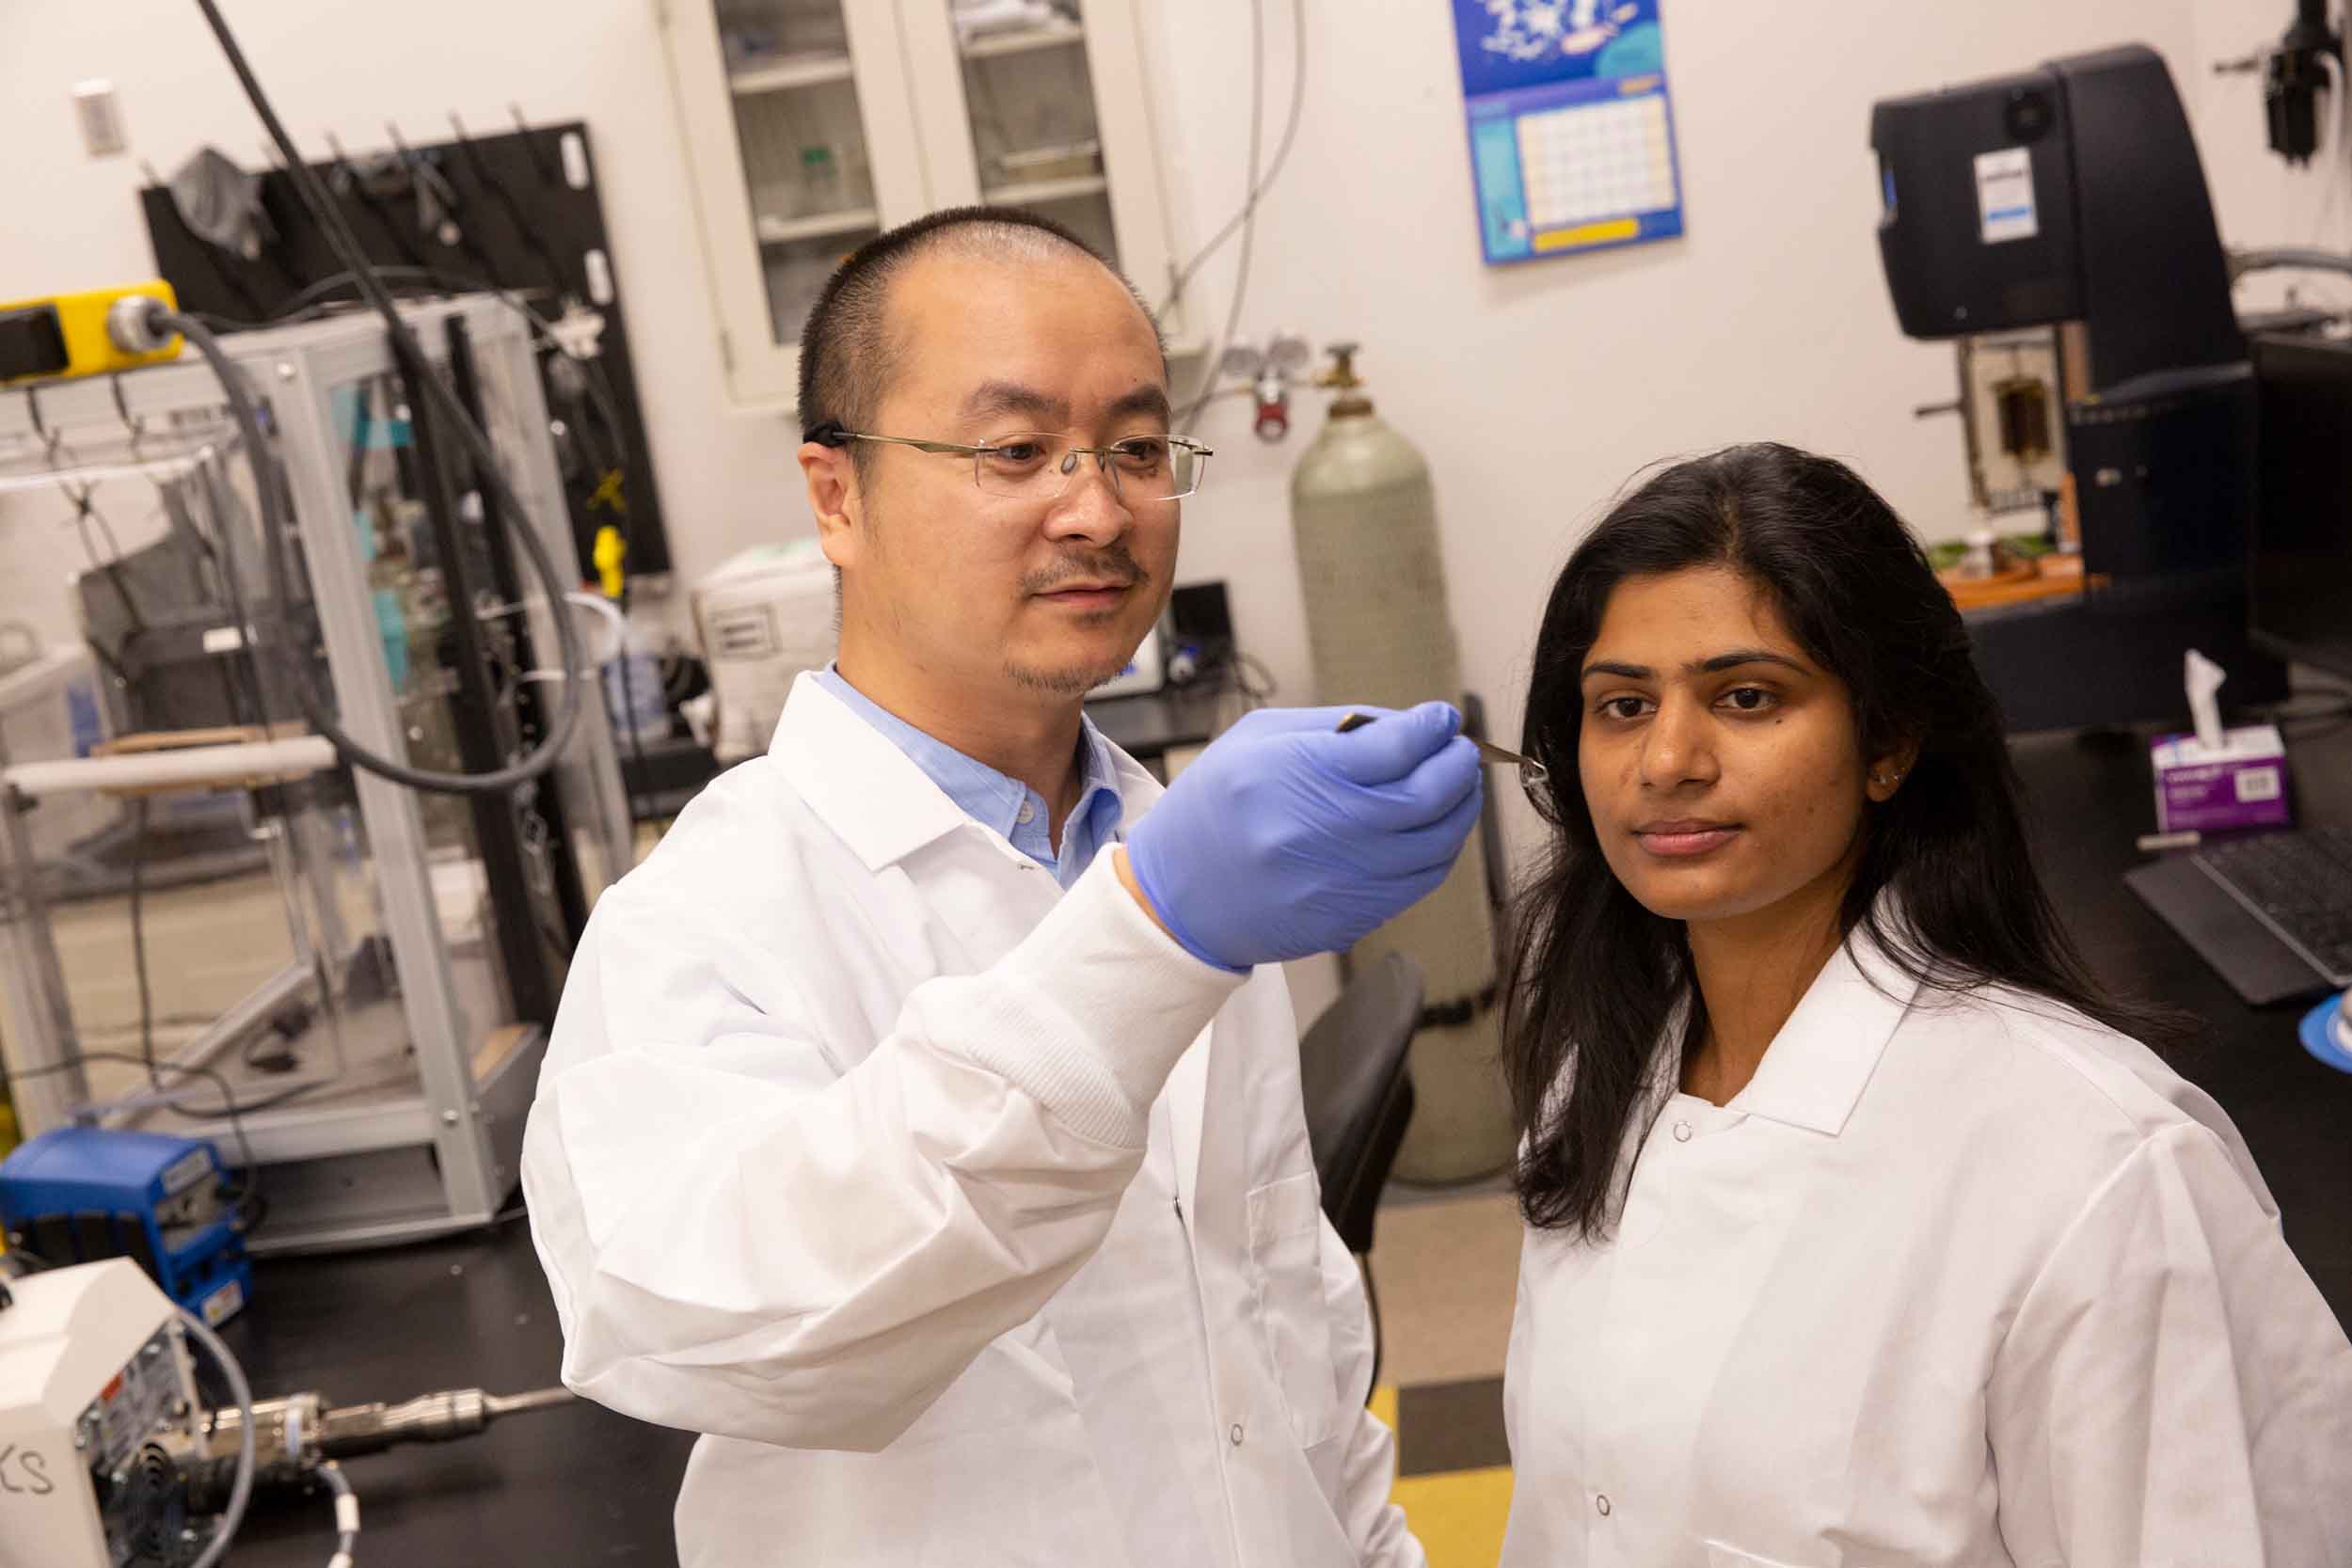 Kenan Song holds a very small 3D printed sample with a pair of tweezers, showing it to his research collaborator, Mounika Kakarla, while in his lab